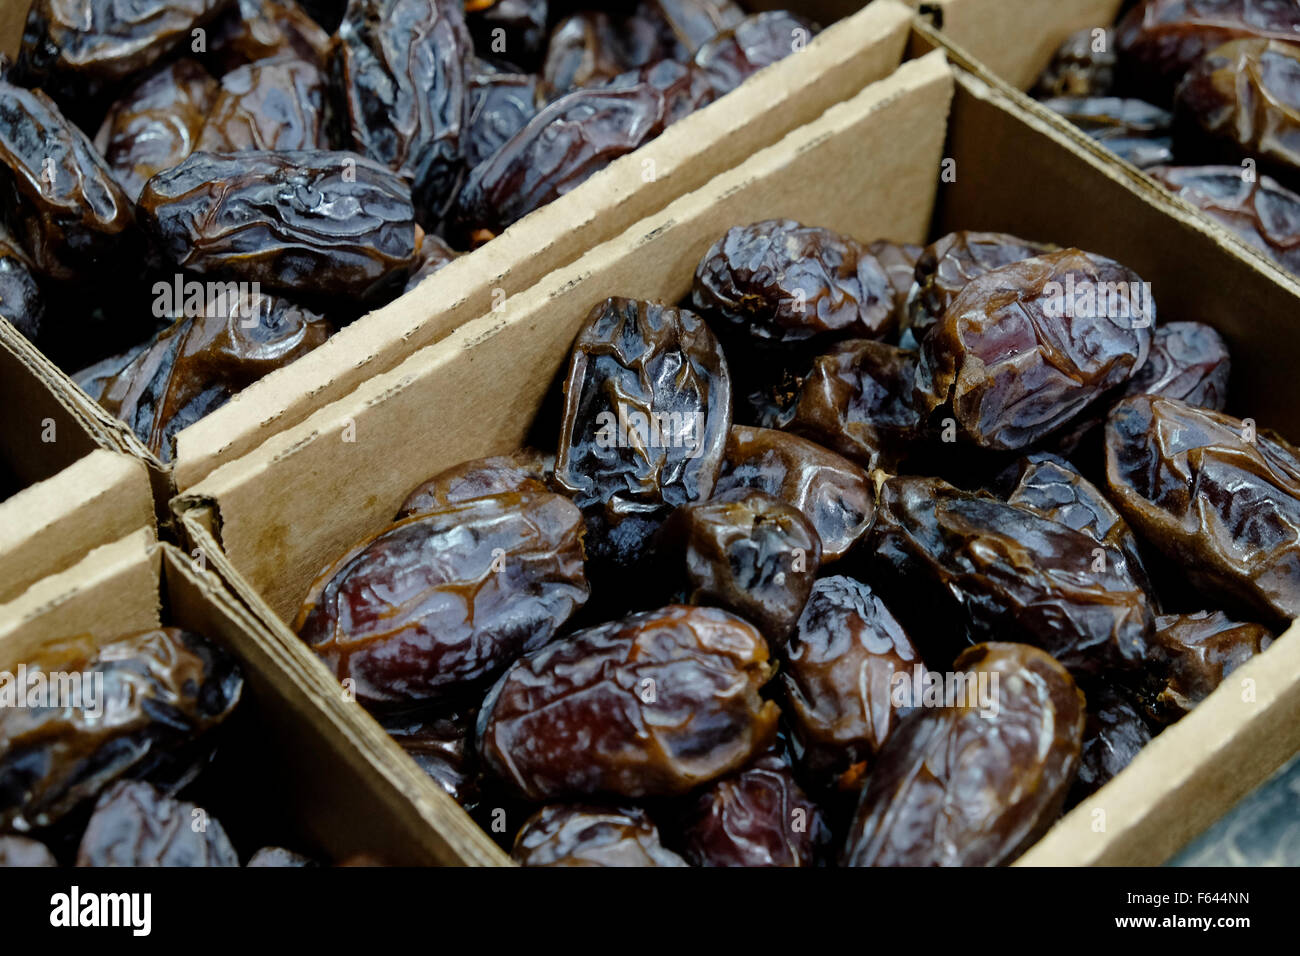 Crate of dried Medjool dates in Masoah Jewish settlement in the Stock Photo  - Alamy